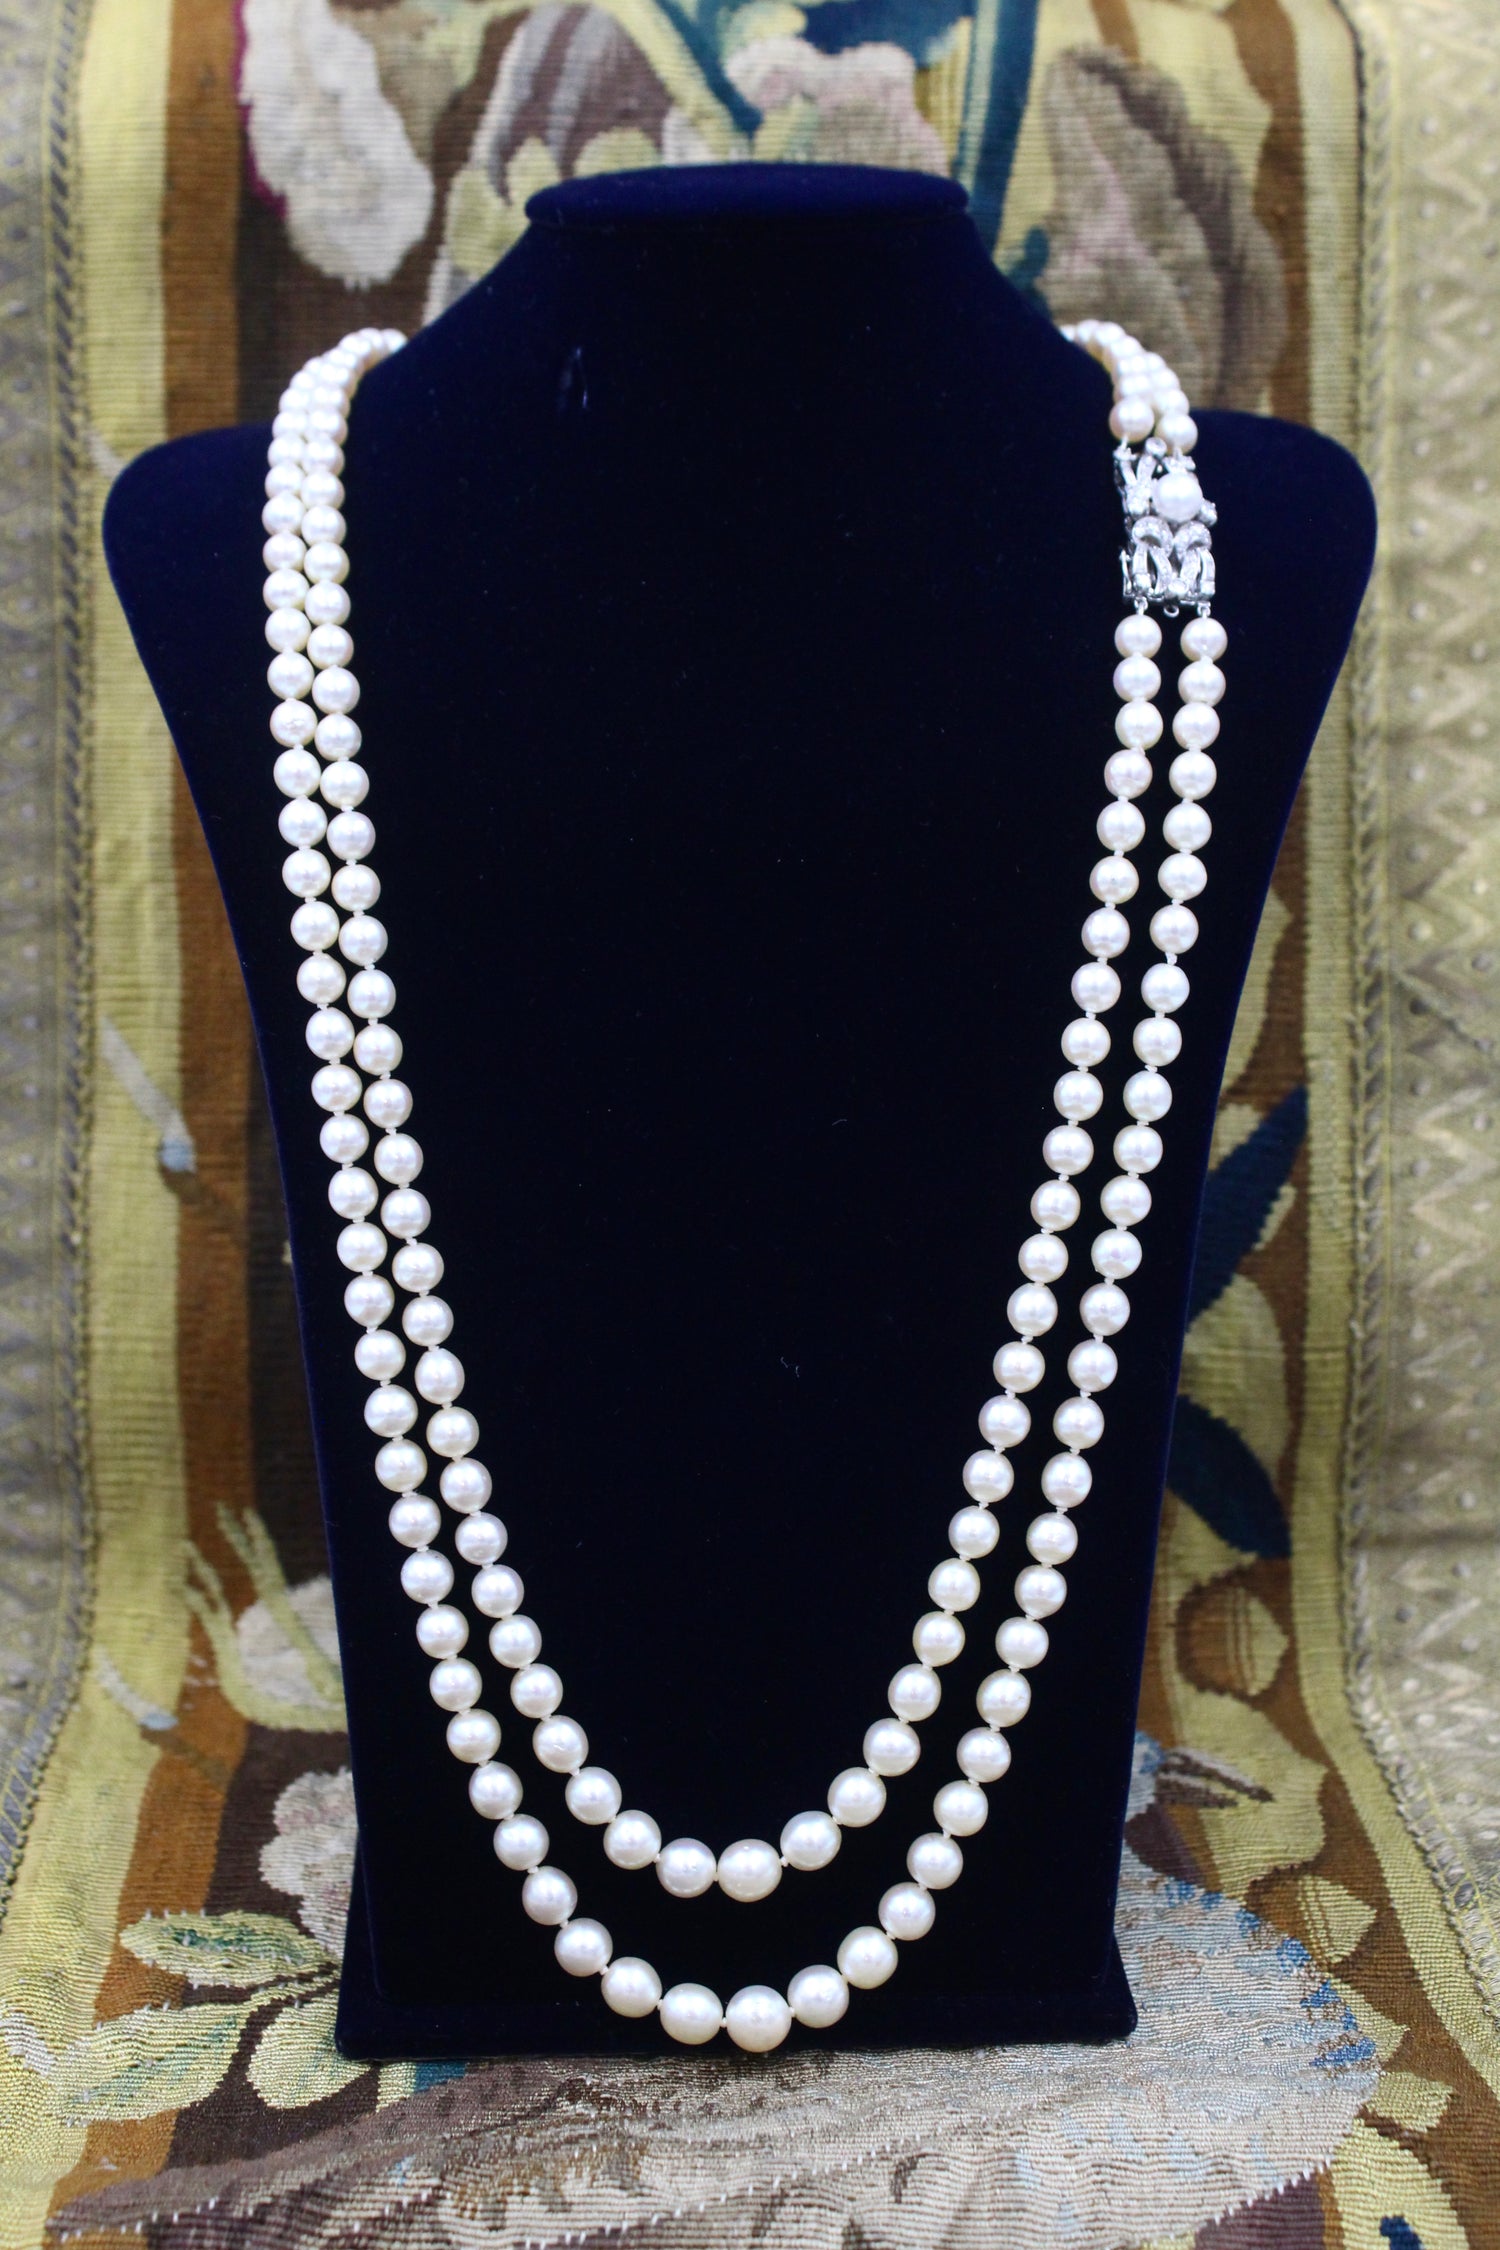 A very fine Platinum (tested) Graduated Cultured Pearl Necklace with a Diamond Clasp - Robin Haydock Antiques